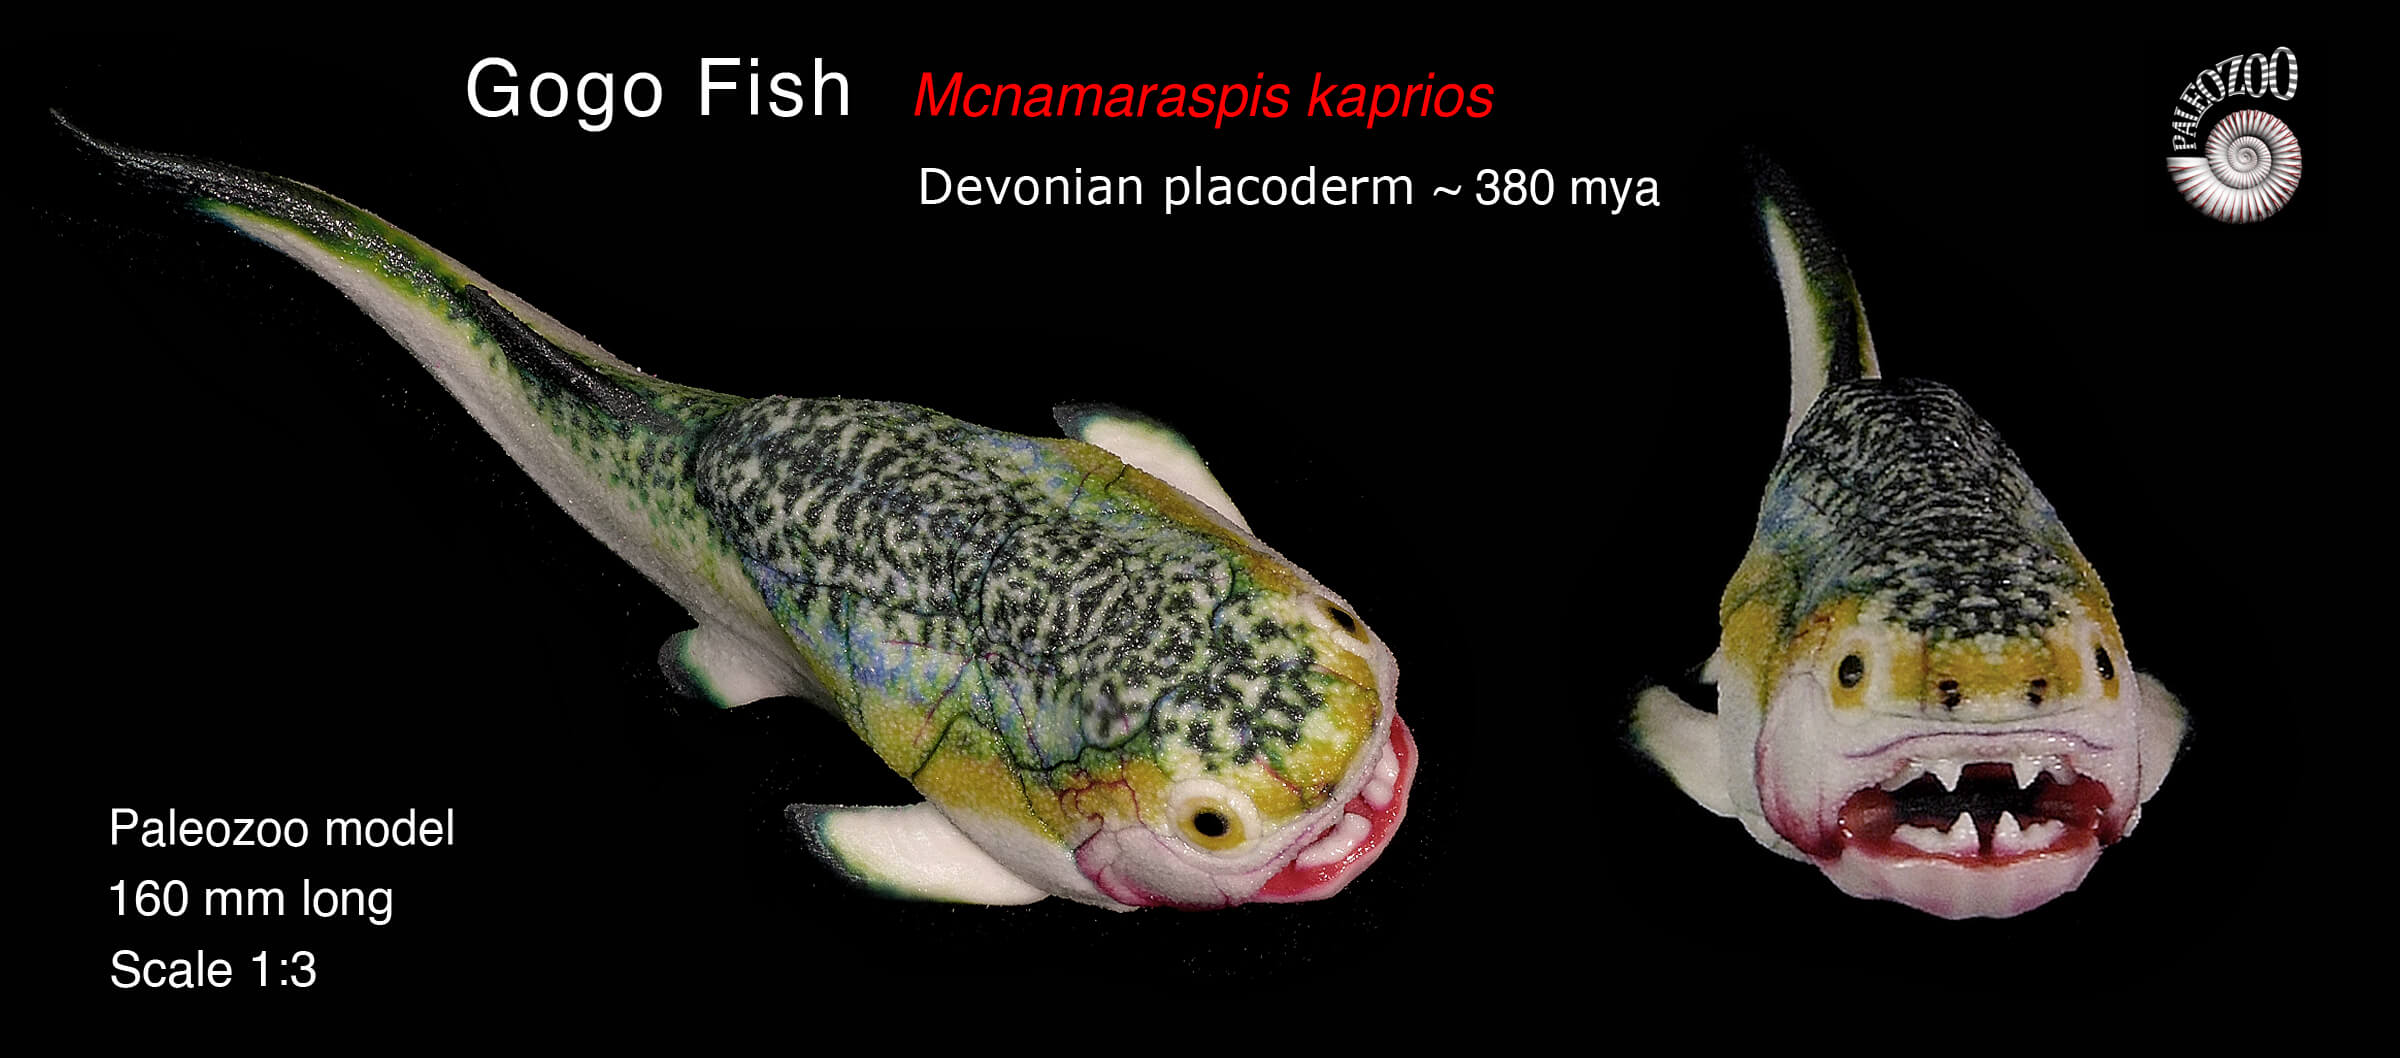 Gog Fish Mcnamaraspis dorsal view from Paleozoo Evolutionary Models by Bruce Currie